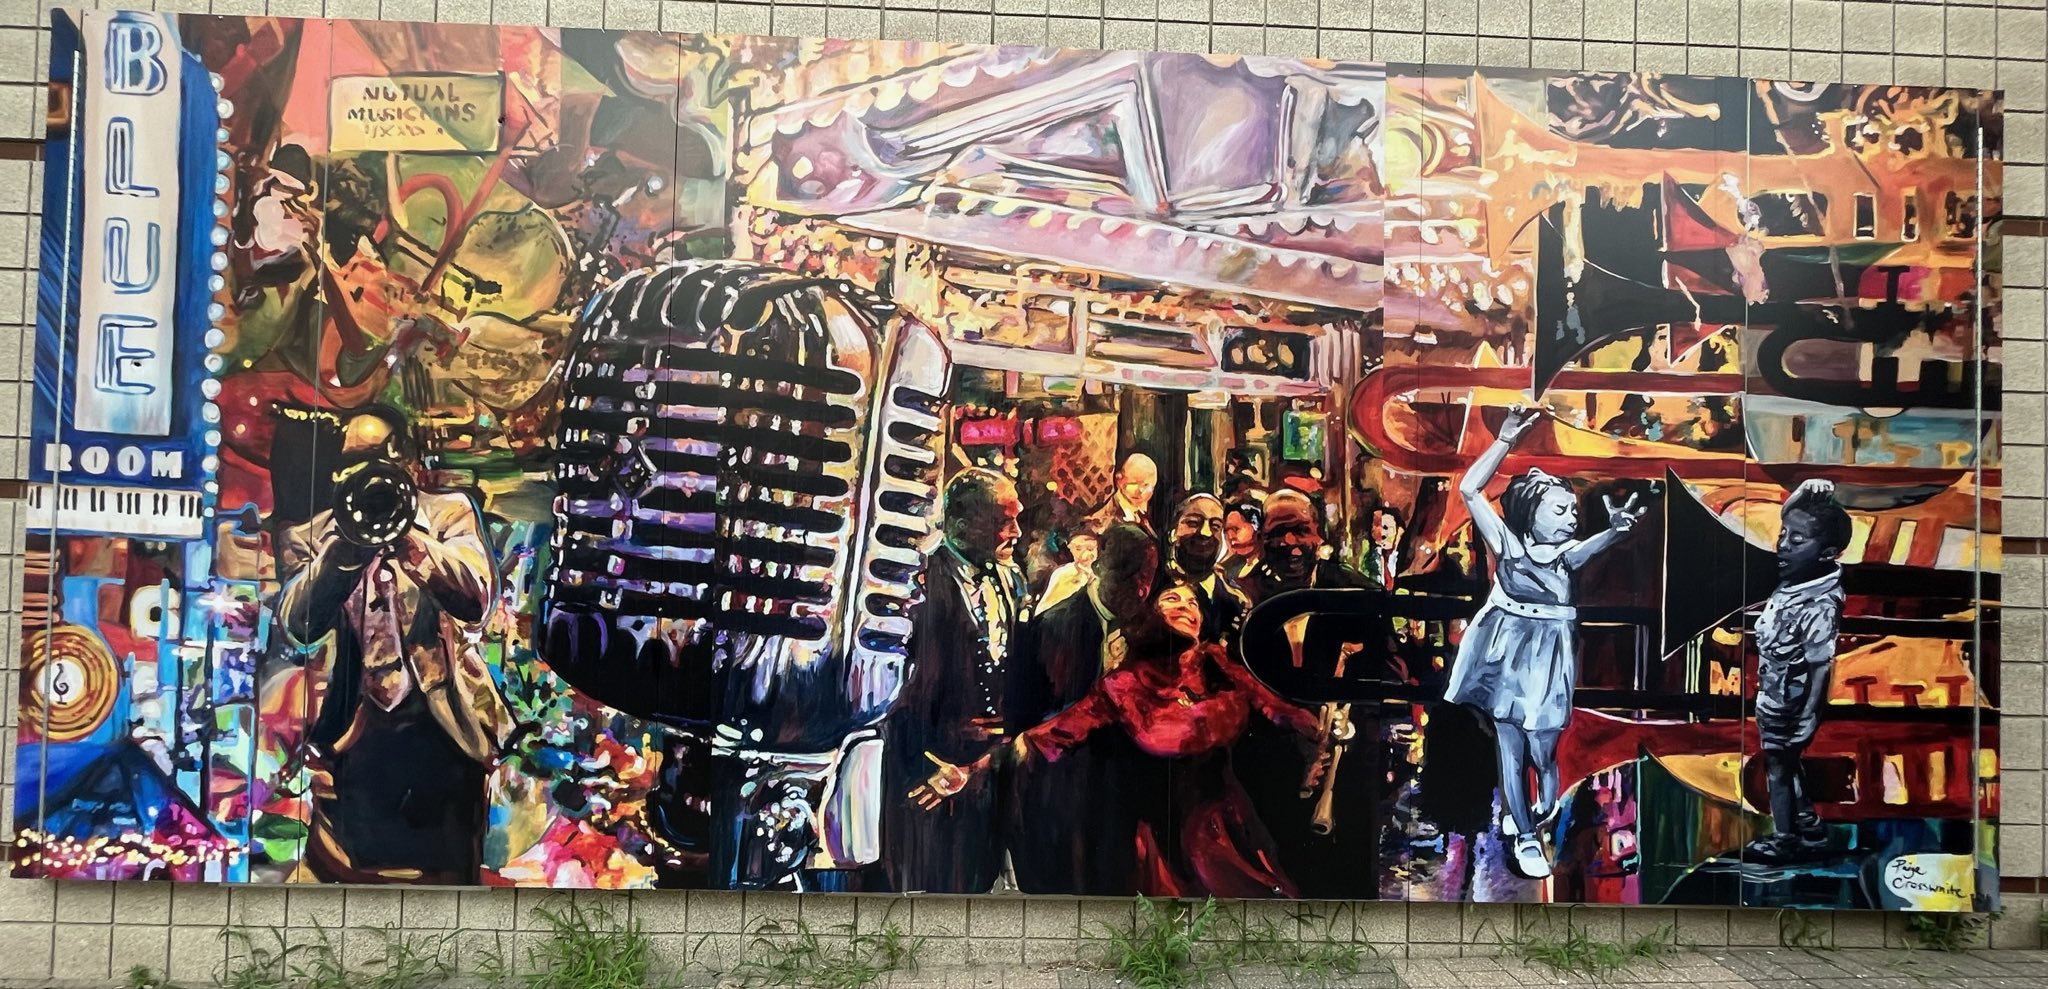 Collage mural of a music scene, with trumpets on the right, a large microphone center-left, and a Blue Room marquee on the left, with people dancing in the middle.